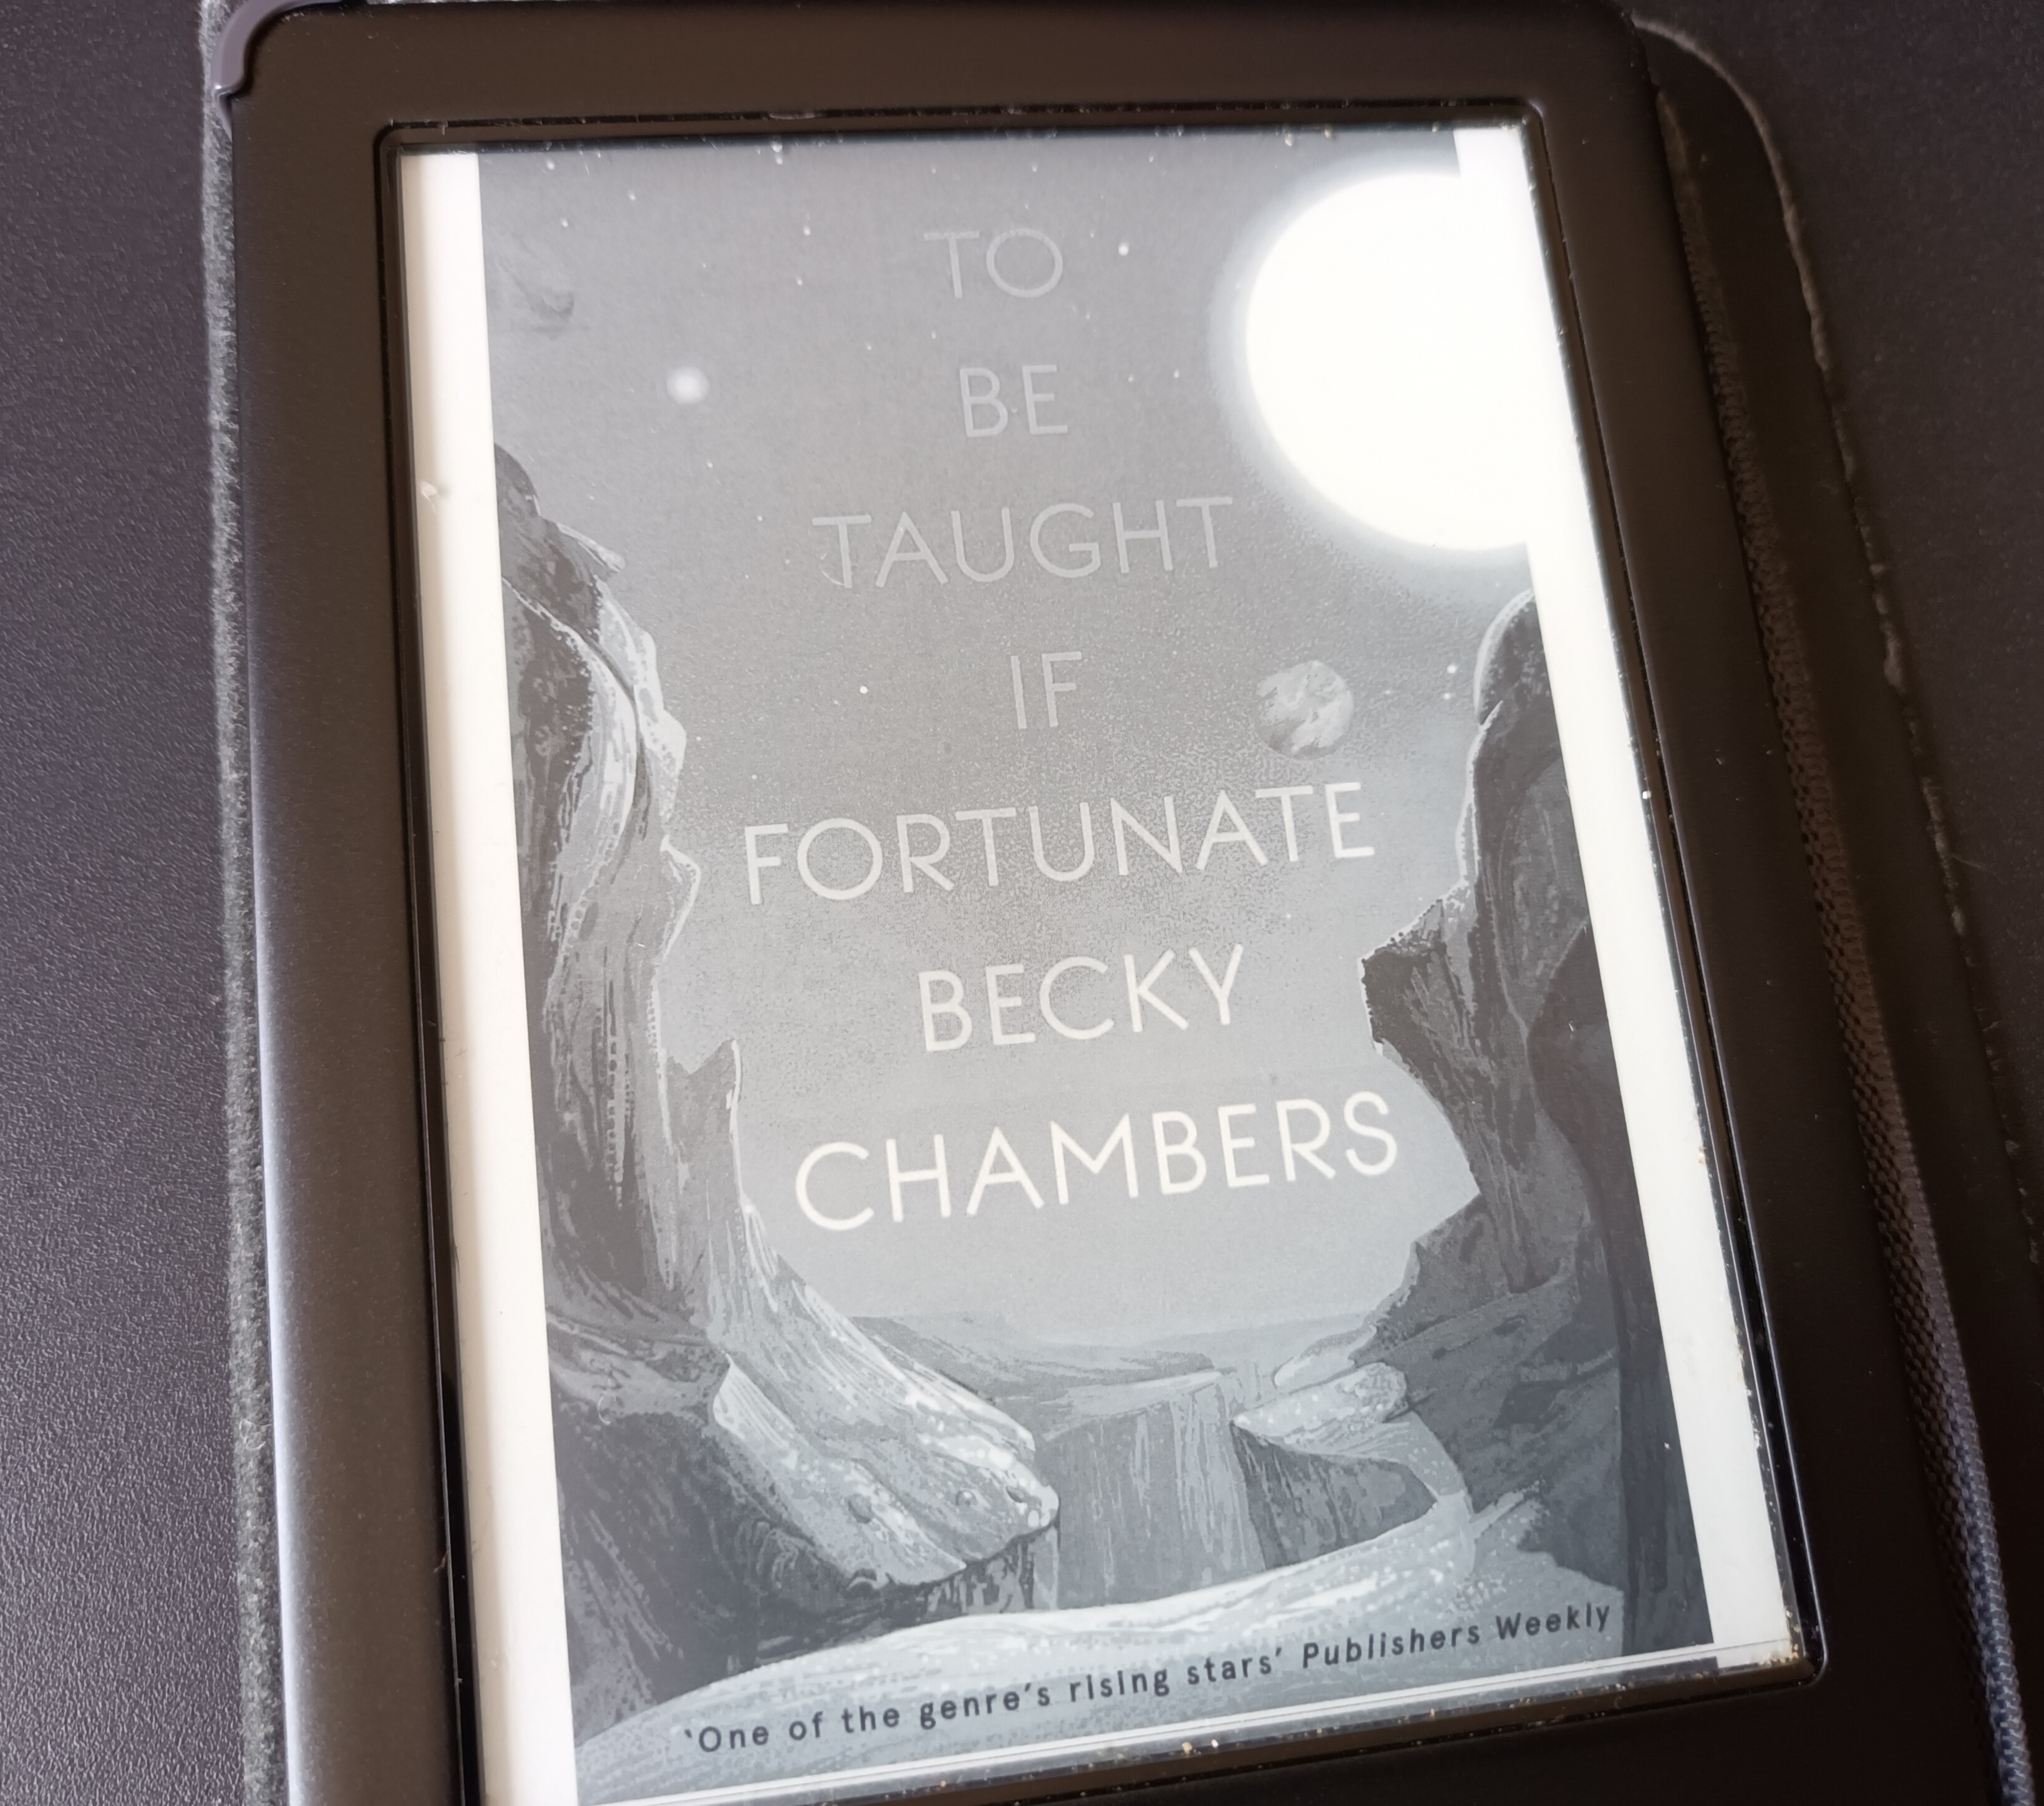 My ereader showing the cover of To be Taught if Fortunate by Becky chambers. It shows the title above a rocky planet landscape. 